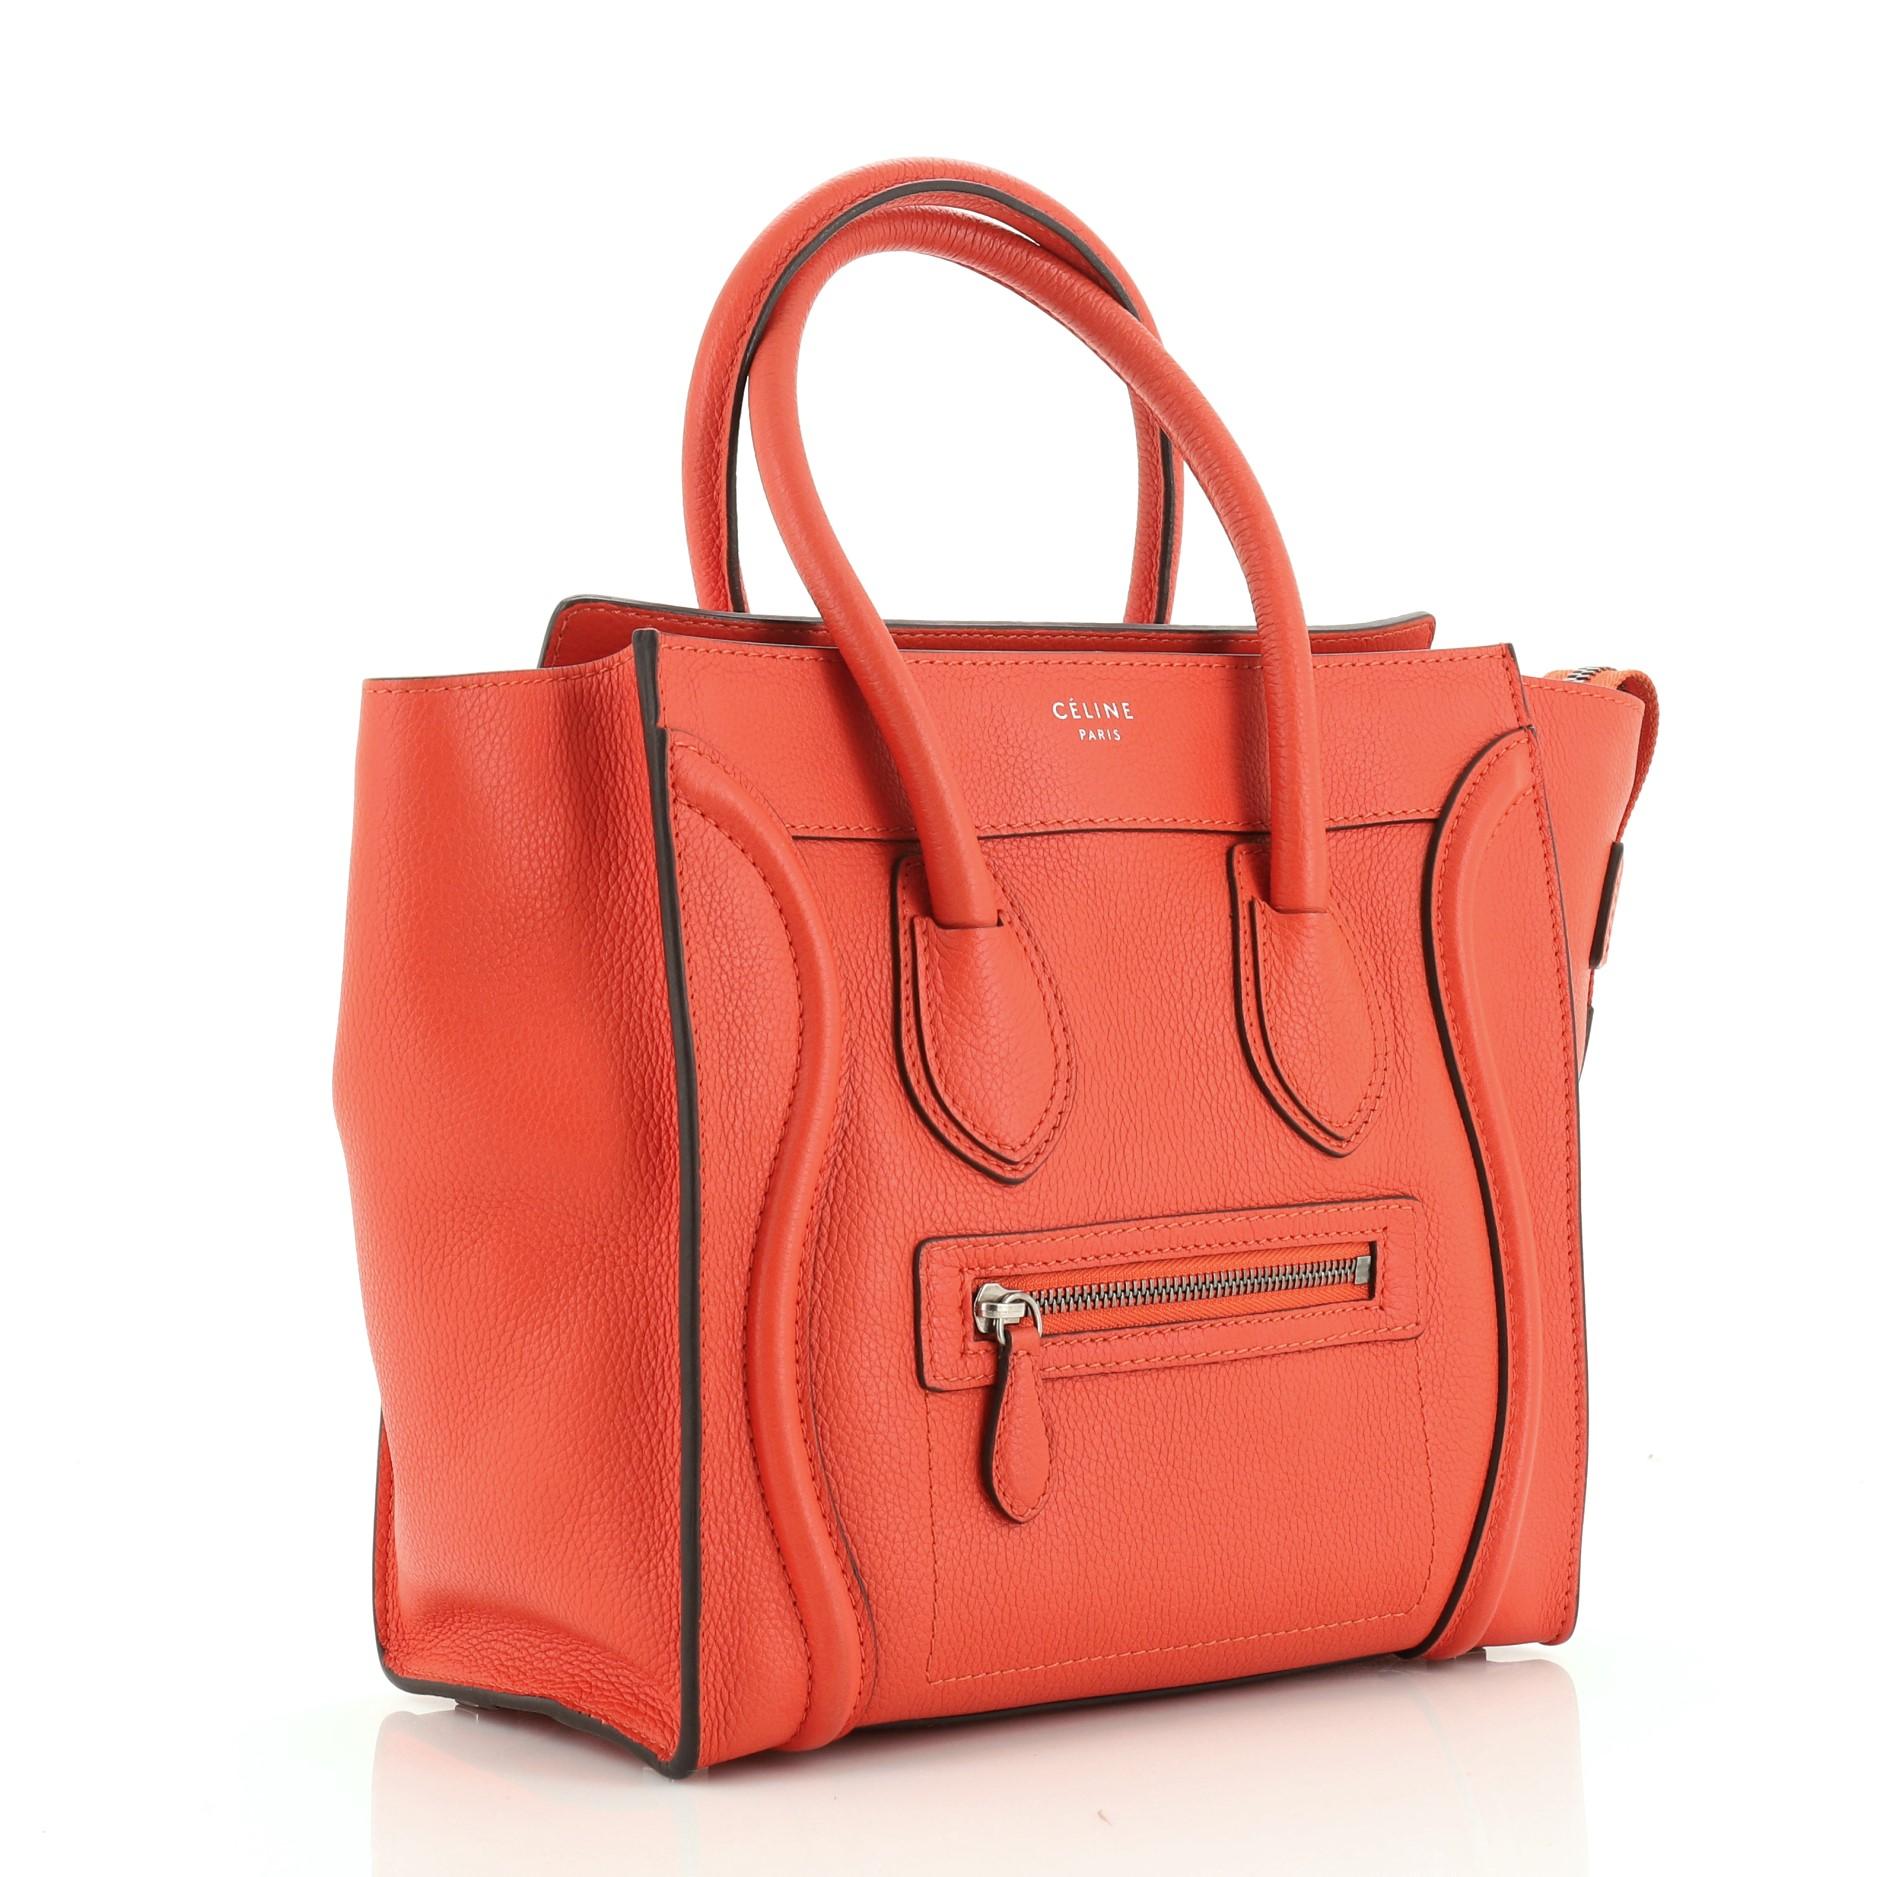 This Celine Luggage Bag Grainy Leather Micro, crafted from orange grainy leather, features dual rolled handles, exterior front zip pocket, and silver-tone hardware. Its zip closure opens to an orange suede interior with side zip and slip pockets.